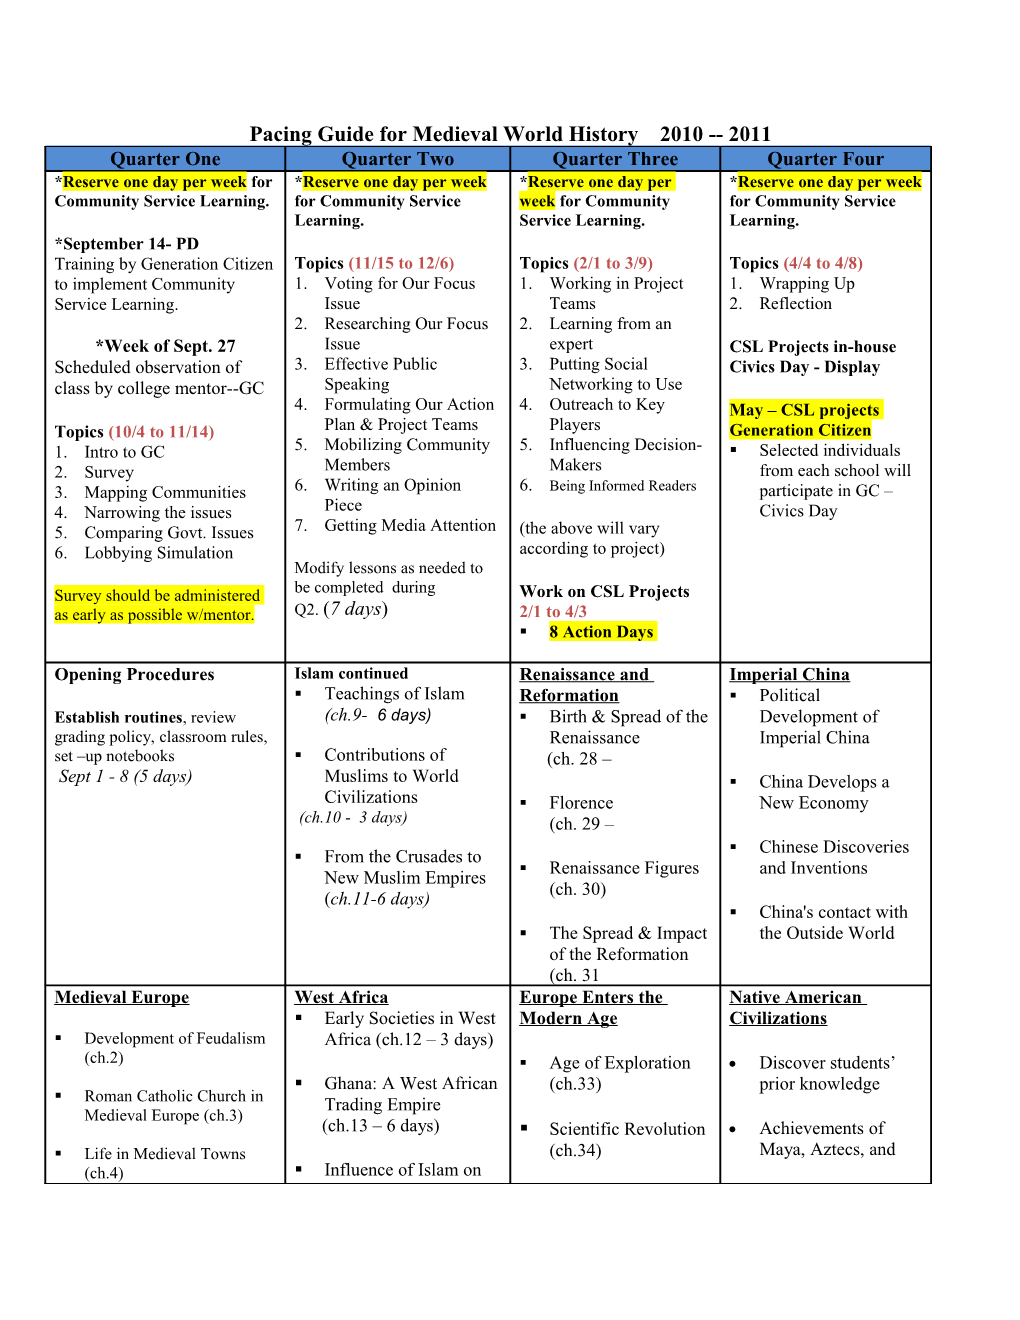 Pacing Guide for Medieval World History 2010 - 2011